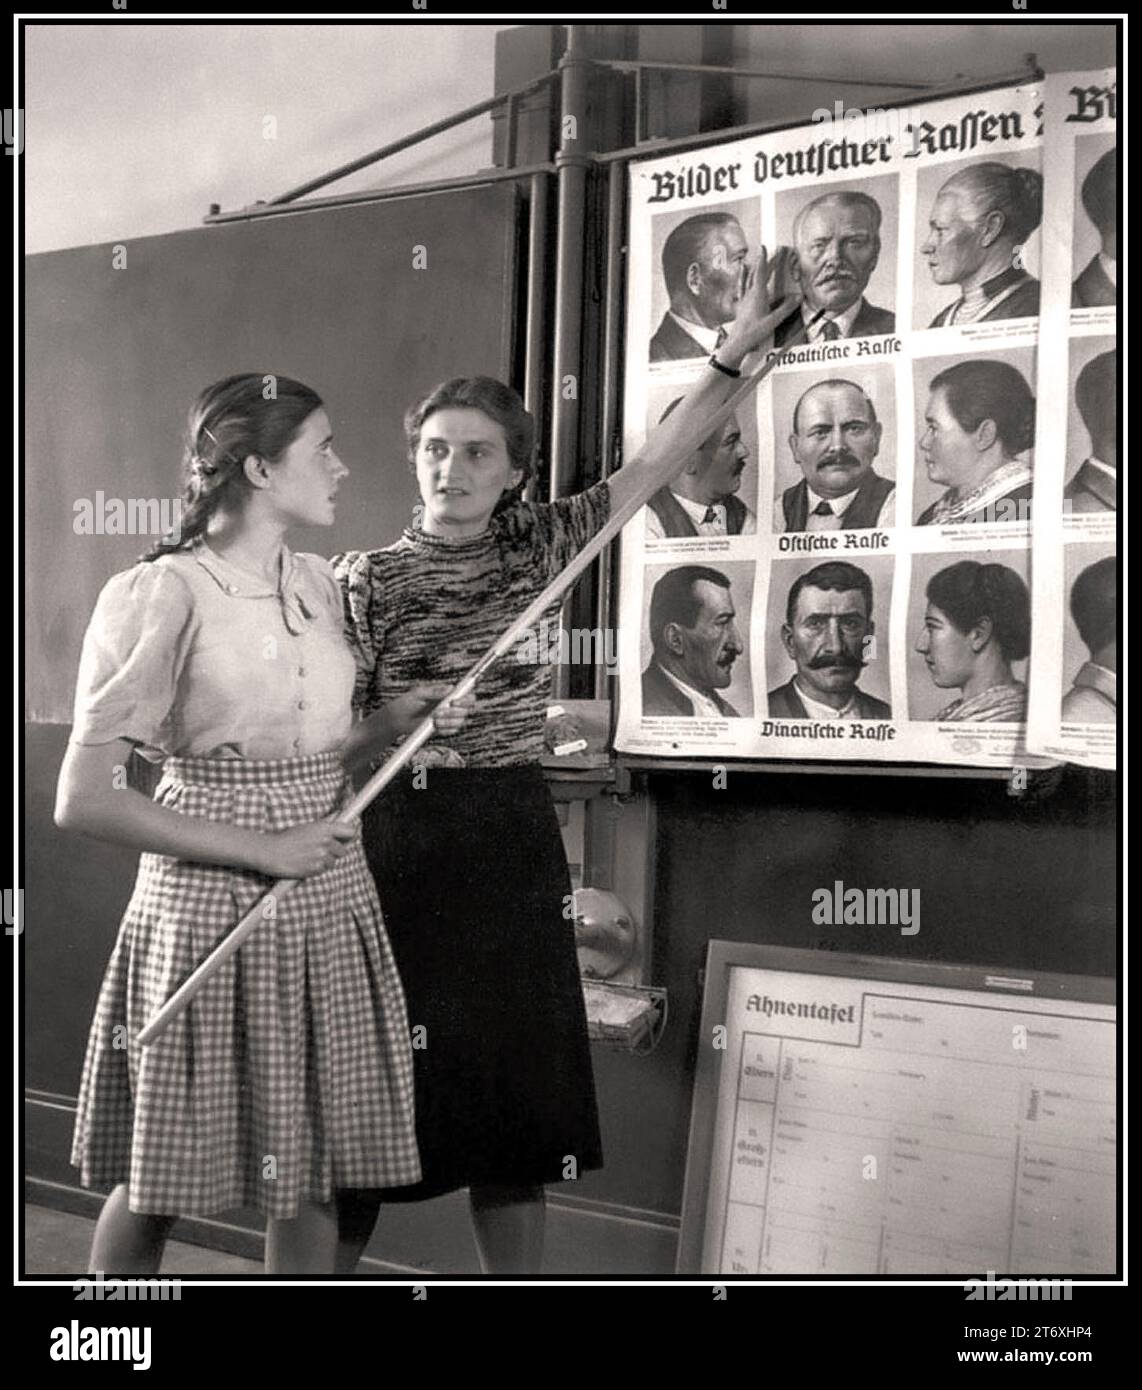 Nazi racial propaganda profiling lessons, with the teacher pointing to a variety of German portraits, titled 'Pictures of German Breeds' 1930s Nazi Germany Racial Racist Nazi race profiling education ideology extremism radicalisation Stock Photo